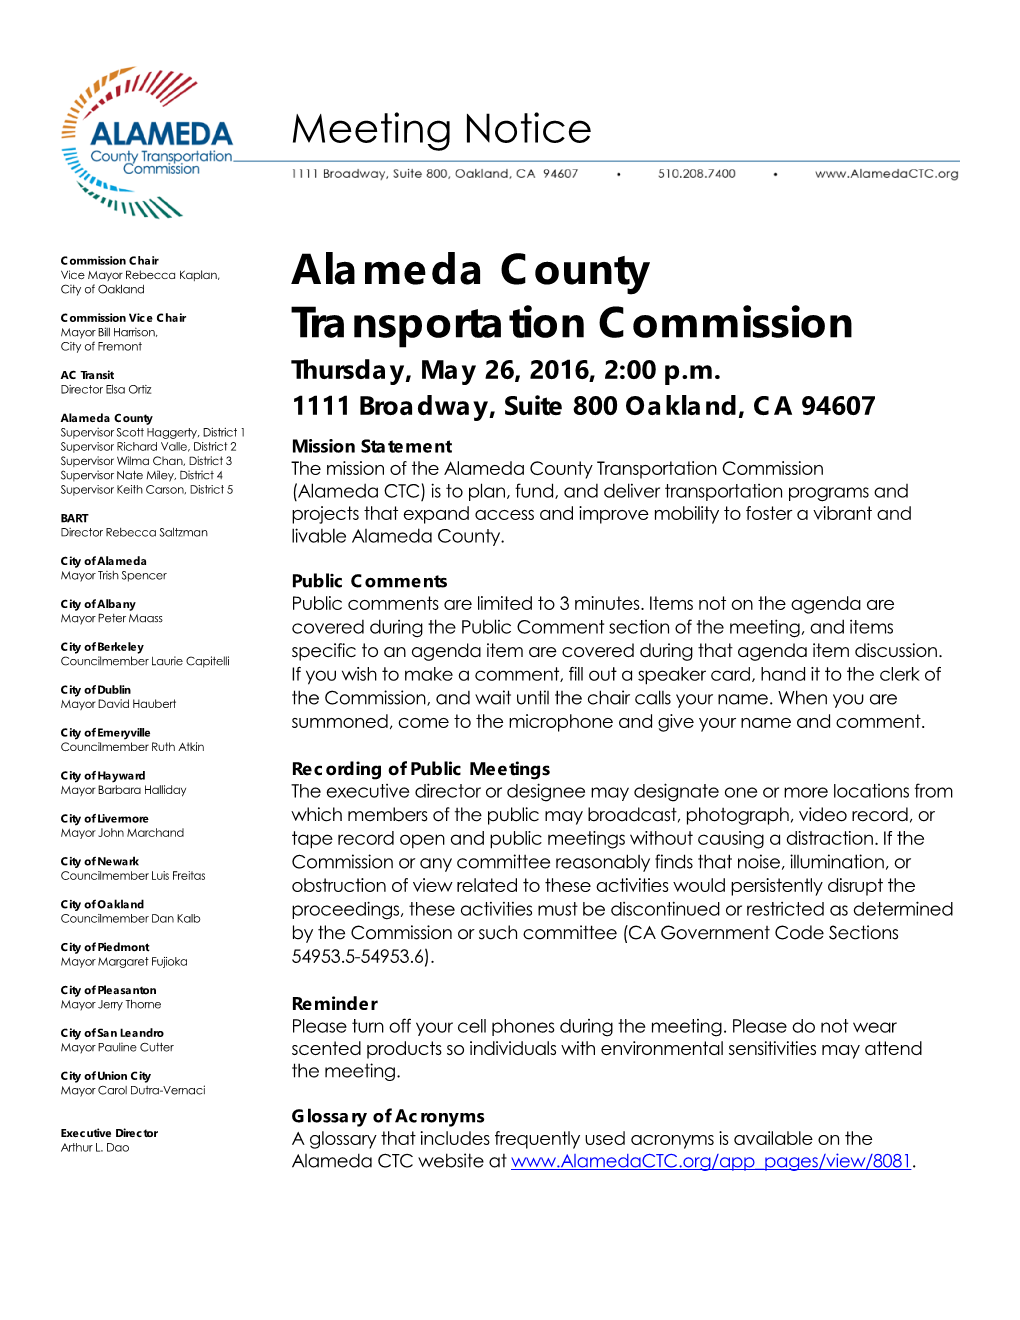 Alameda County Transportation Commission Staffing Organizational Chart May 2016